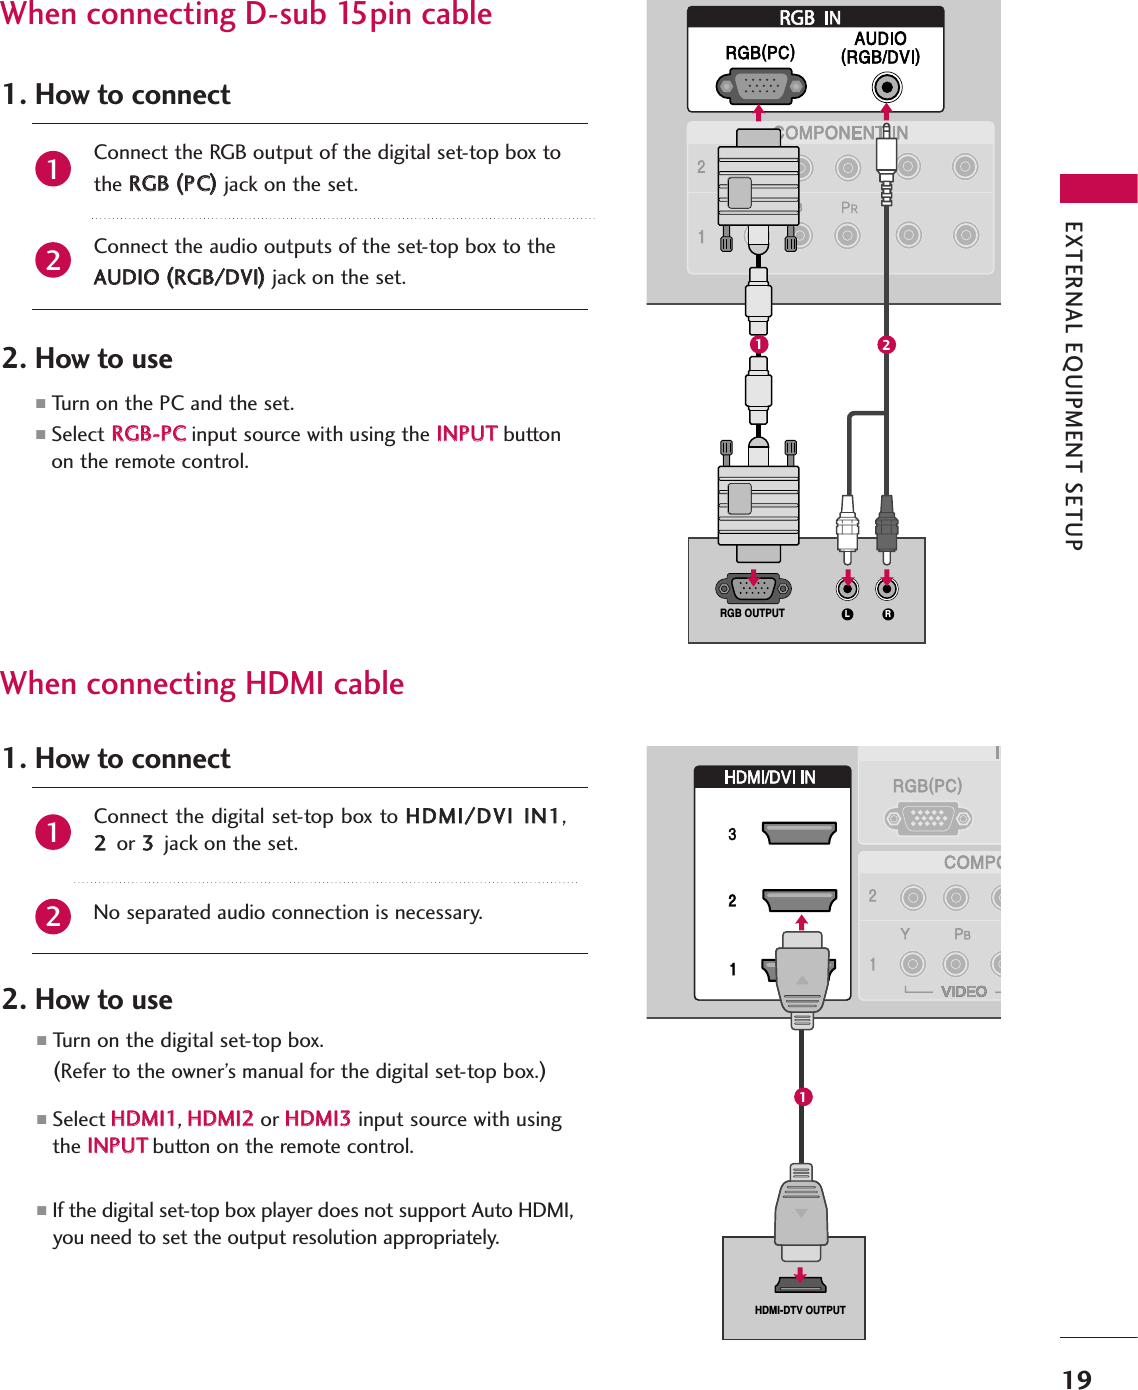 When connecting D-sub 15pin cable(DVI)(DVI)RGBL RRGB OUTPUT(DVI)(DVI)VI)HDMI-DTV OUTPUTRGBConnect the RGB output of the digital set-top box to the RRGGBB  ((PPCC))jack on the set.Connect the audio outputs of the set-top box to the AAUUDDIIOO  ((RRGGBB//DDVVII))jack on the set.1. How to connect2. How to use■Turn  on  the  PC  and  the  set.  ■Select RRGGBB--PPCCinput source with using the IINNPPUUTTbuttonon the remote control.When connecting HDMI cableConnect the digital set-top box to HHDDMMII//DDVVII  IINN11,22  or 33  jack on the set.No separated audio connection is necessary.1. How to connect2. How to use■Turn  on  the  digital  set-top  box.  (Refer to the owner’s manual for the digital set-top box.)■Select HHDDMMII11,HHDDMMII22  or HHDDMMII33input source with usingthe IINNPPUUTTbutton on the remote control.■If the digital set-top box player does not support Auto HDMI,you need to set the output resolution appropriately.2121EXTERNAL EQUIPMENT SETUP19121